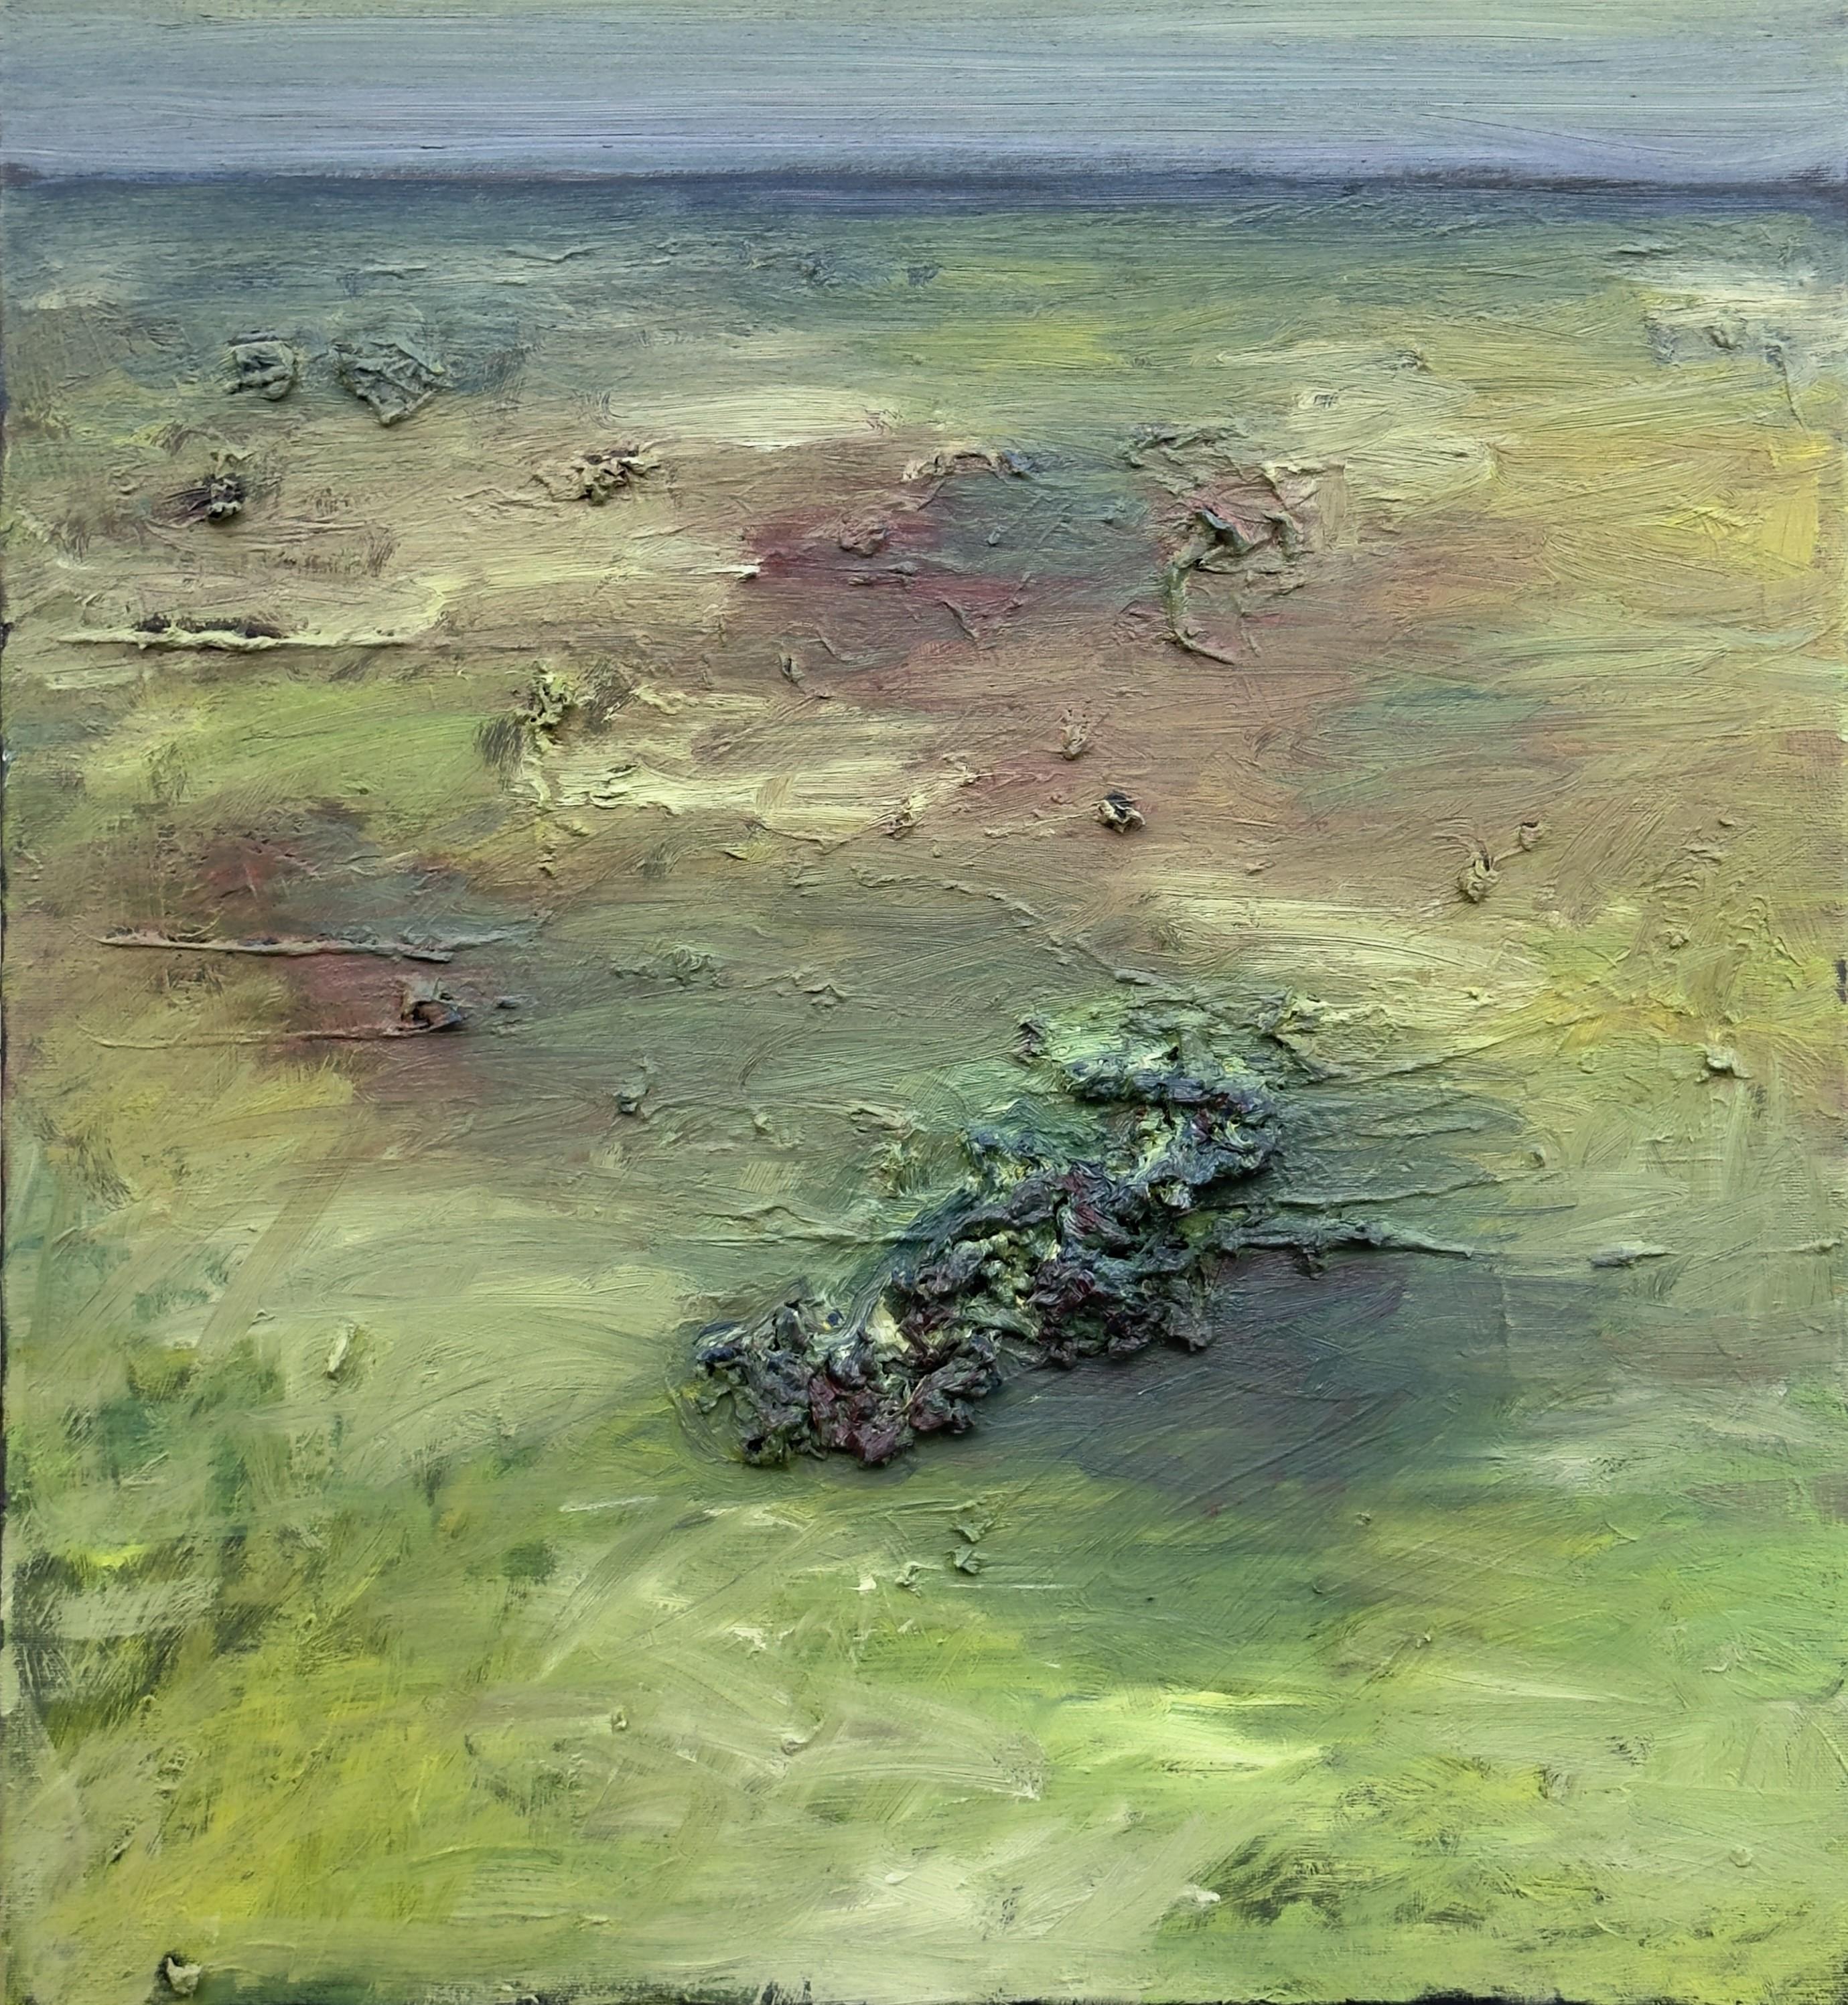 Body in the Field #2 - 21st Century, abstract painting, landscape, green, yellow - Abstract Expressionist Painting by Zsolt Berszán